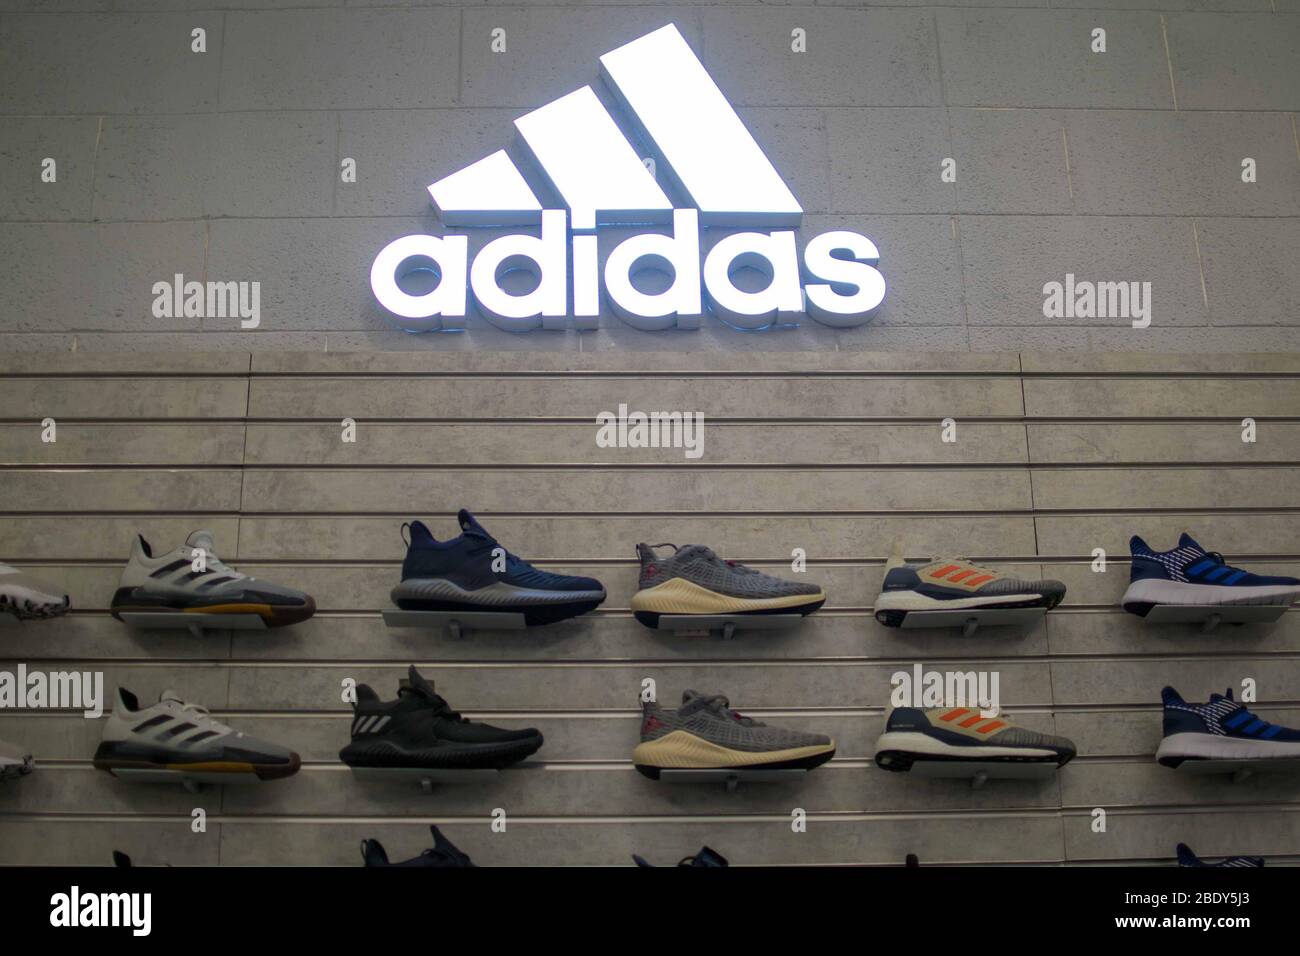 NOV. 28, 2019-BAGUIO CITY PHILIPPINES : Adidas shoes on display for sale  with the Adidas logo on the top Stock Photo - Alamy